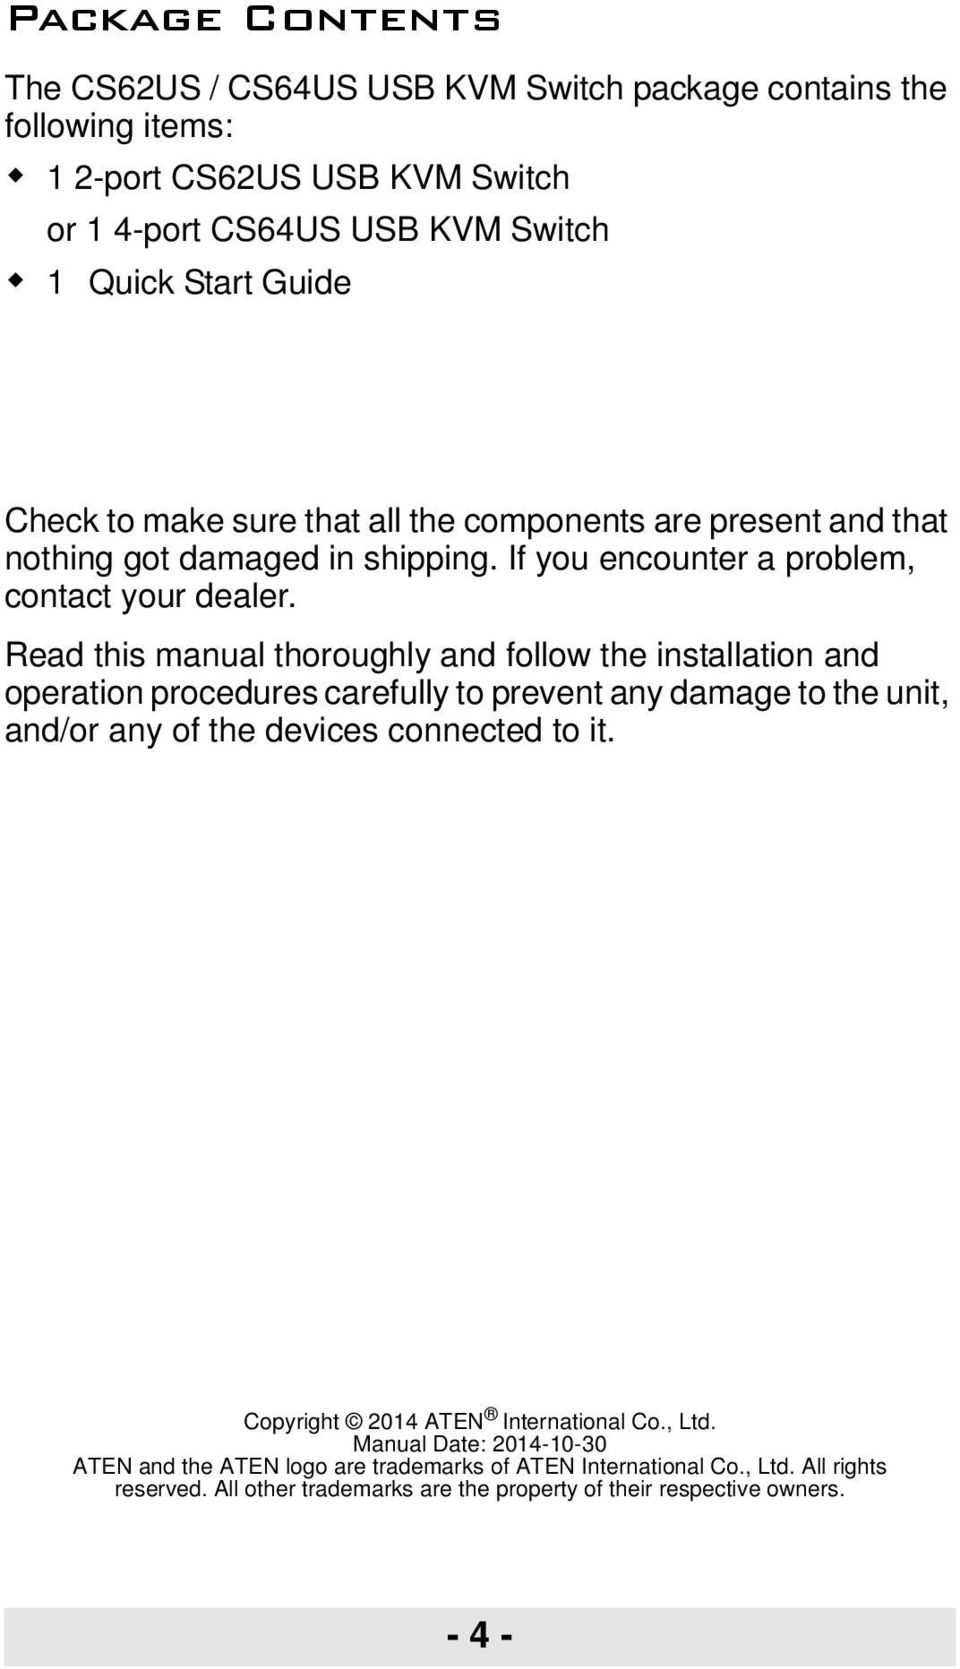 Read this manual thoroughly and follow the installation and operation procedures carefully to prevent any damage to the unit, and/or any of the devices connected to it.